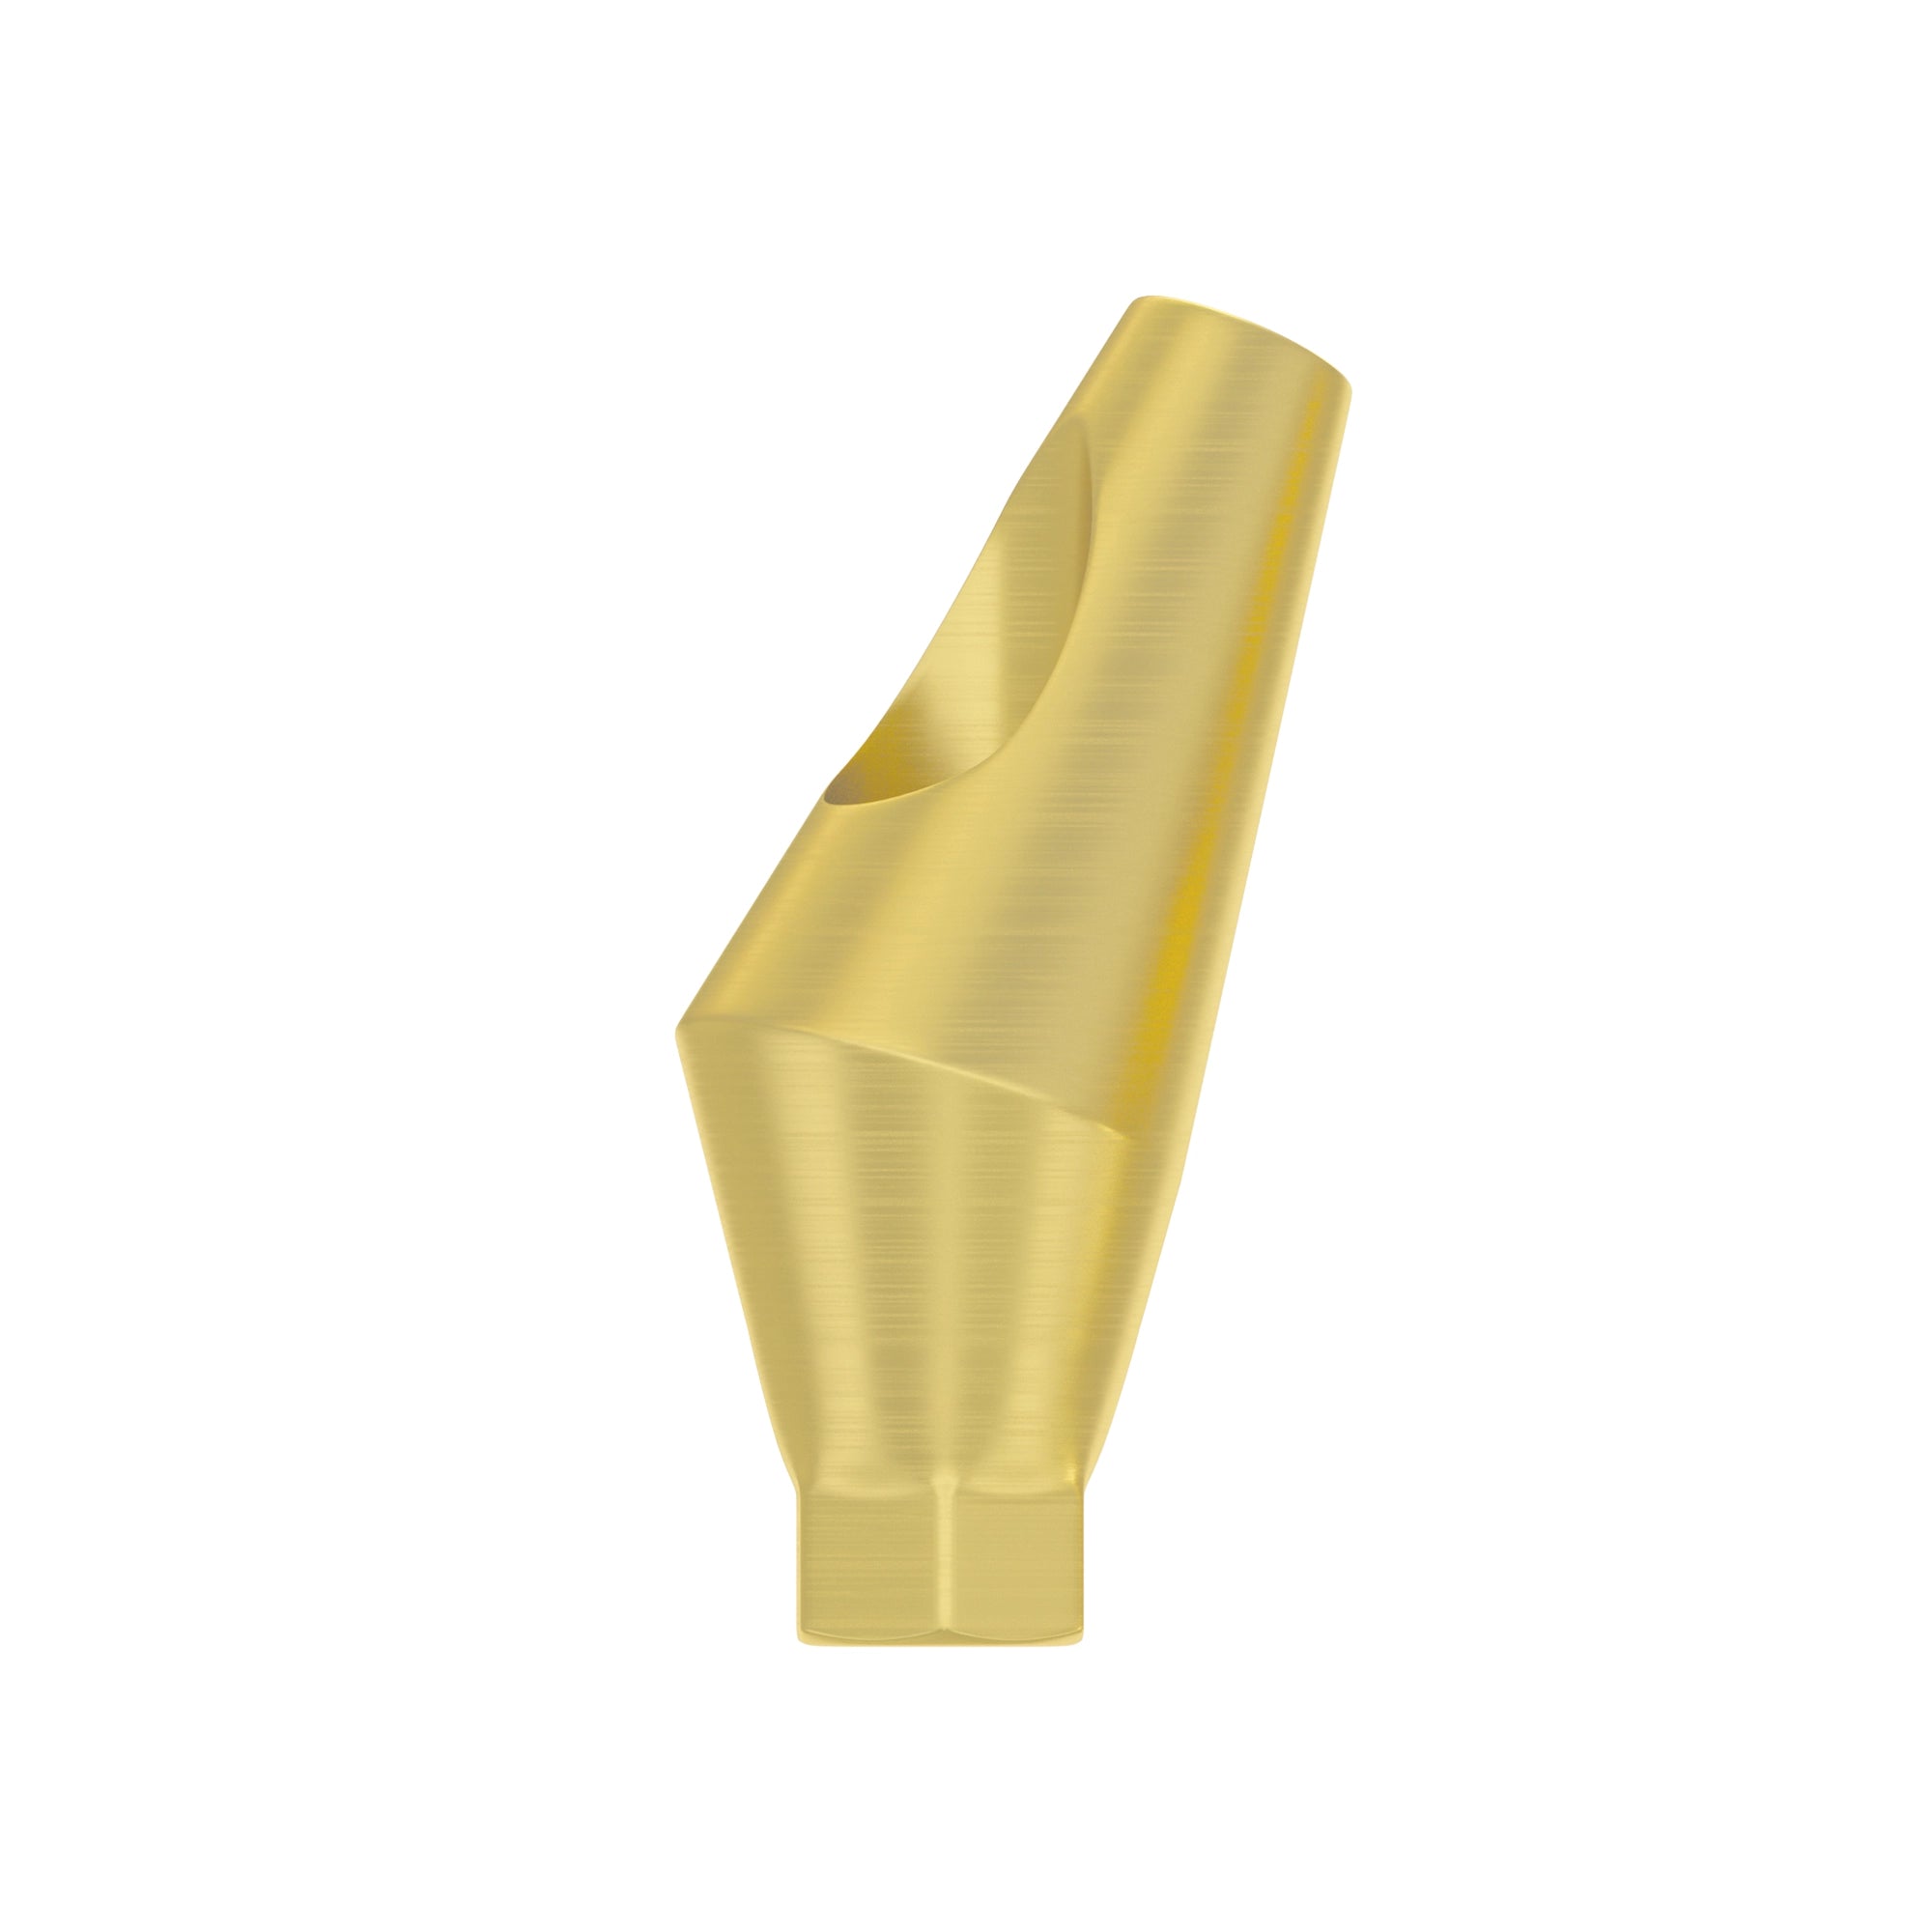 DSI Angulated 25° Regular Abutment 3.6mm - Conical Connection RP Ø4.3mm-5.0mm